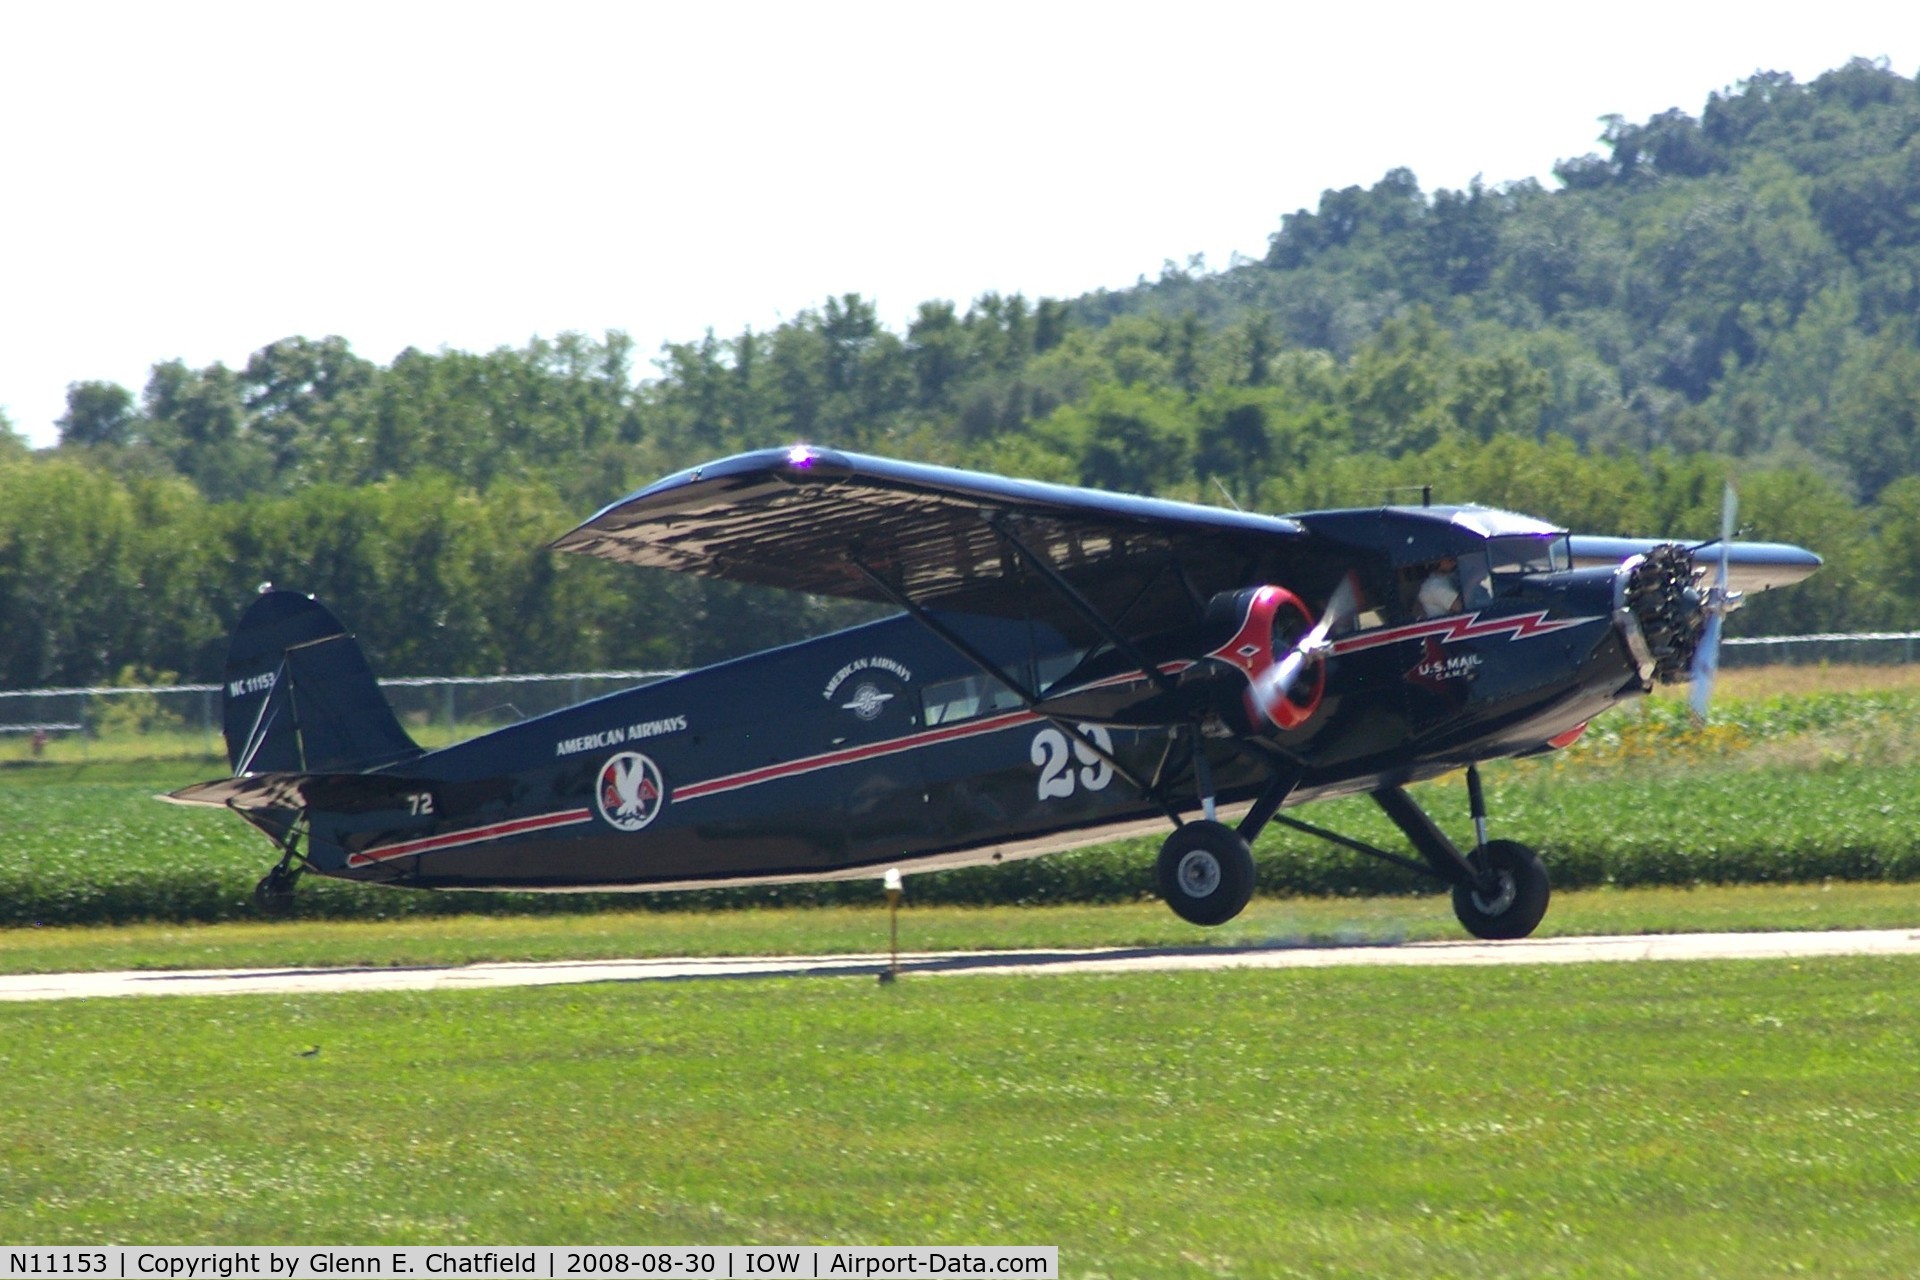 N11153, 1931 Stinson SM-6000-B C/N 5021, Arriving on Runway 30 with the U.S. Mail